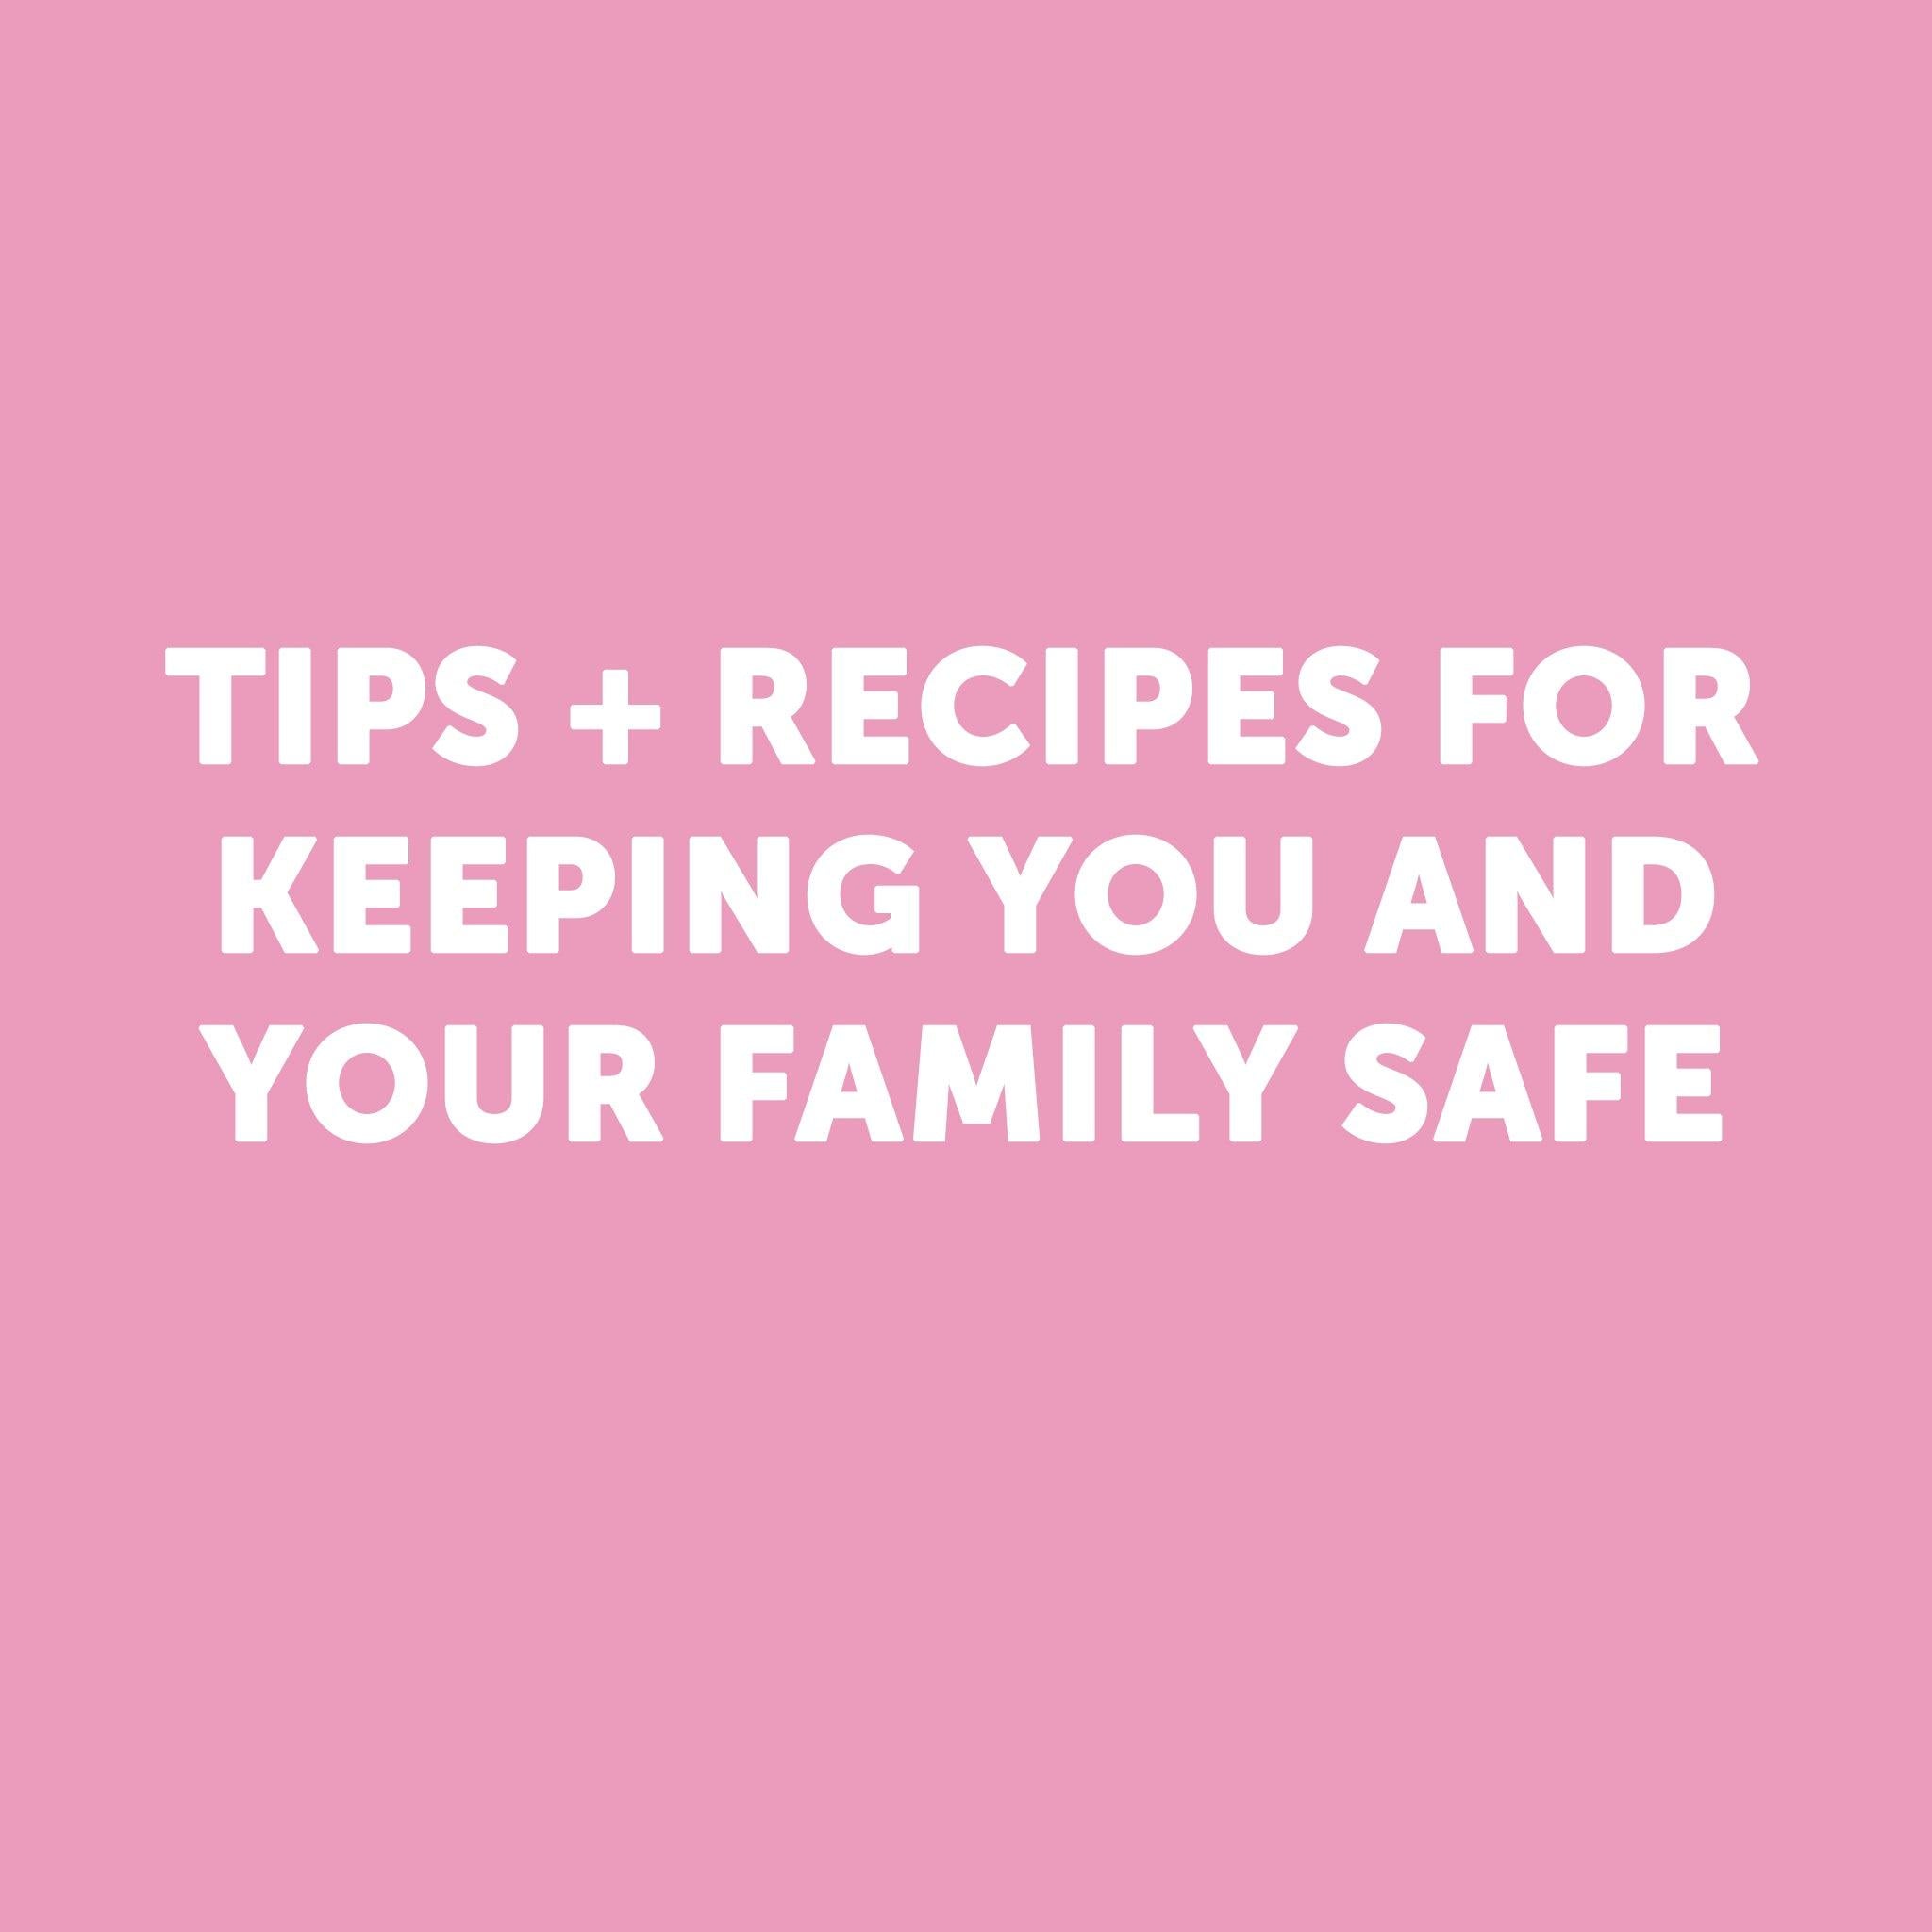 DIY Recipes to Keep You & Your Family Safe - - local - letsbelocal.ca